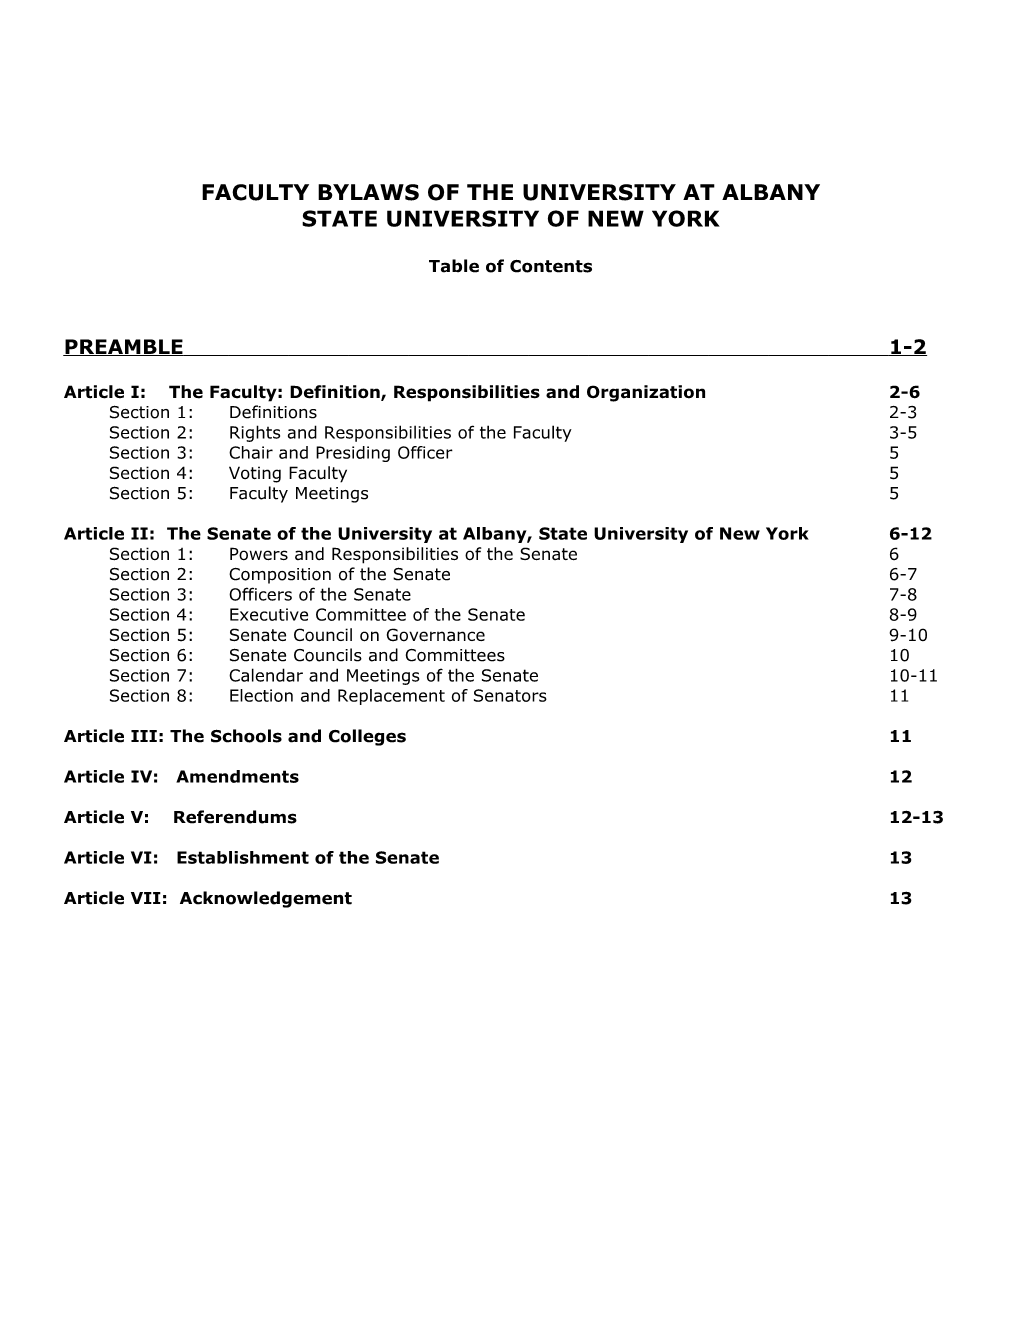 Bylaws Revised by the Faculty on 12/08/03